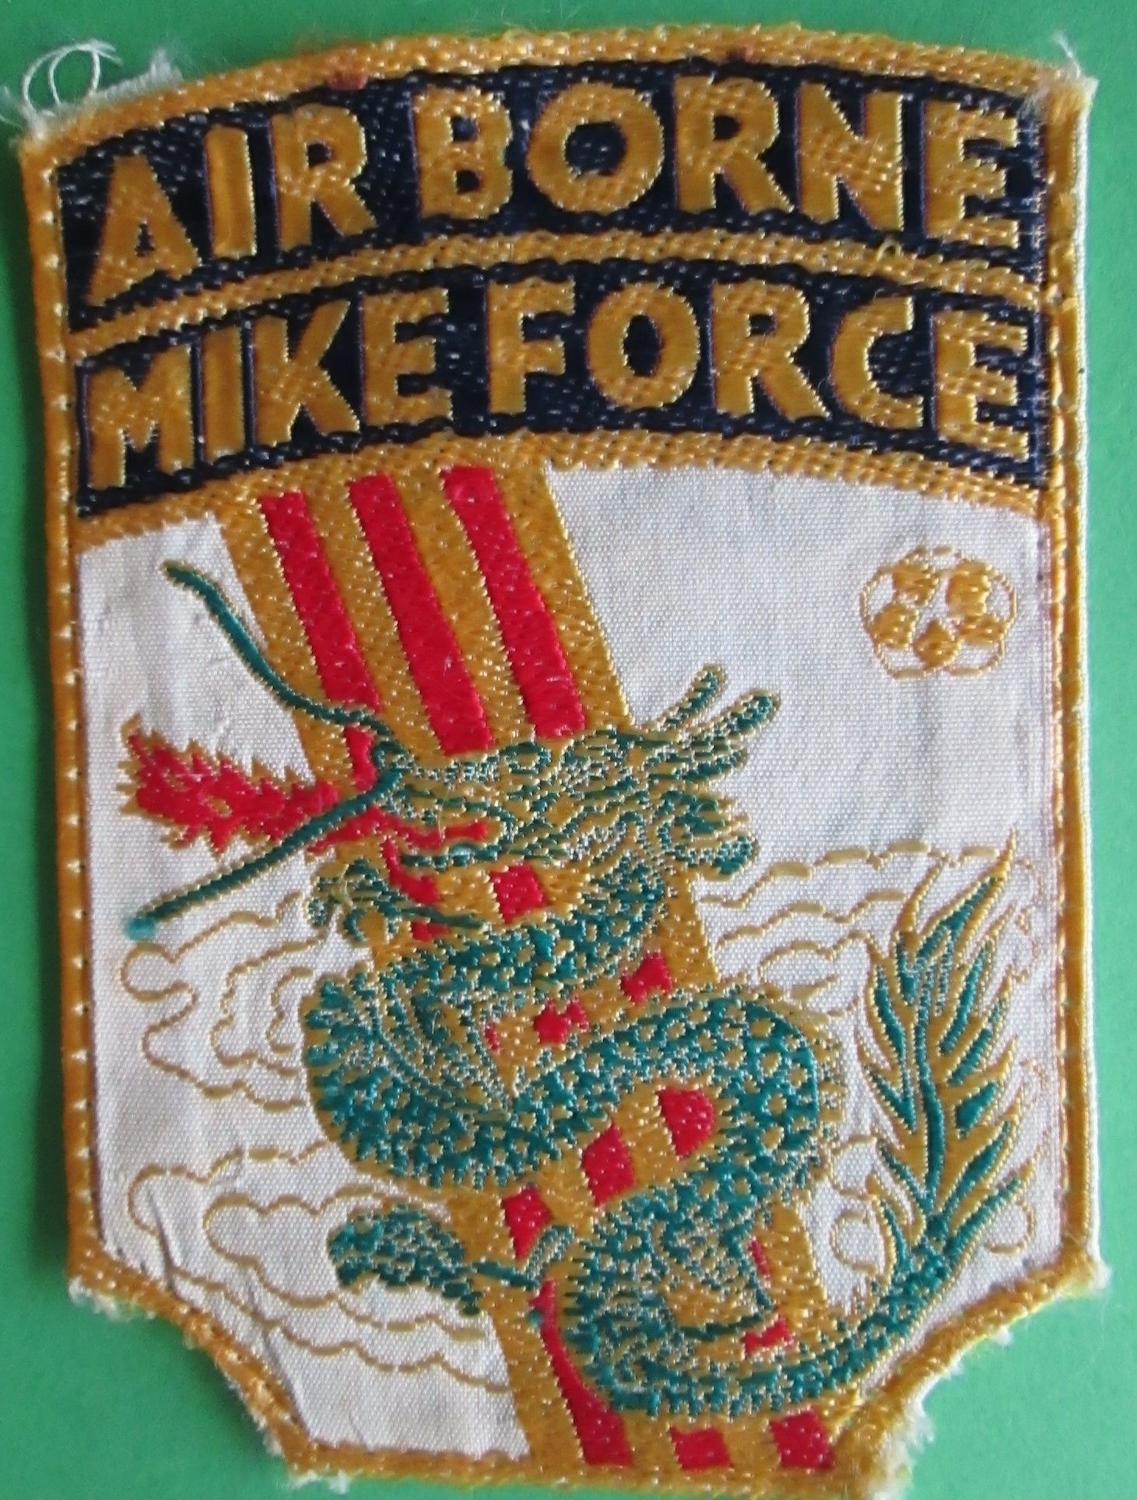 A RARE VIETNAM MADE MIKE FORCE BADGE